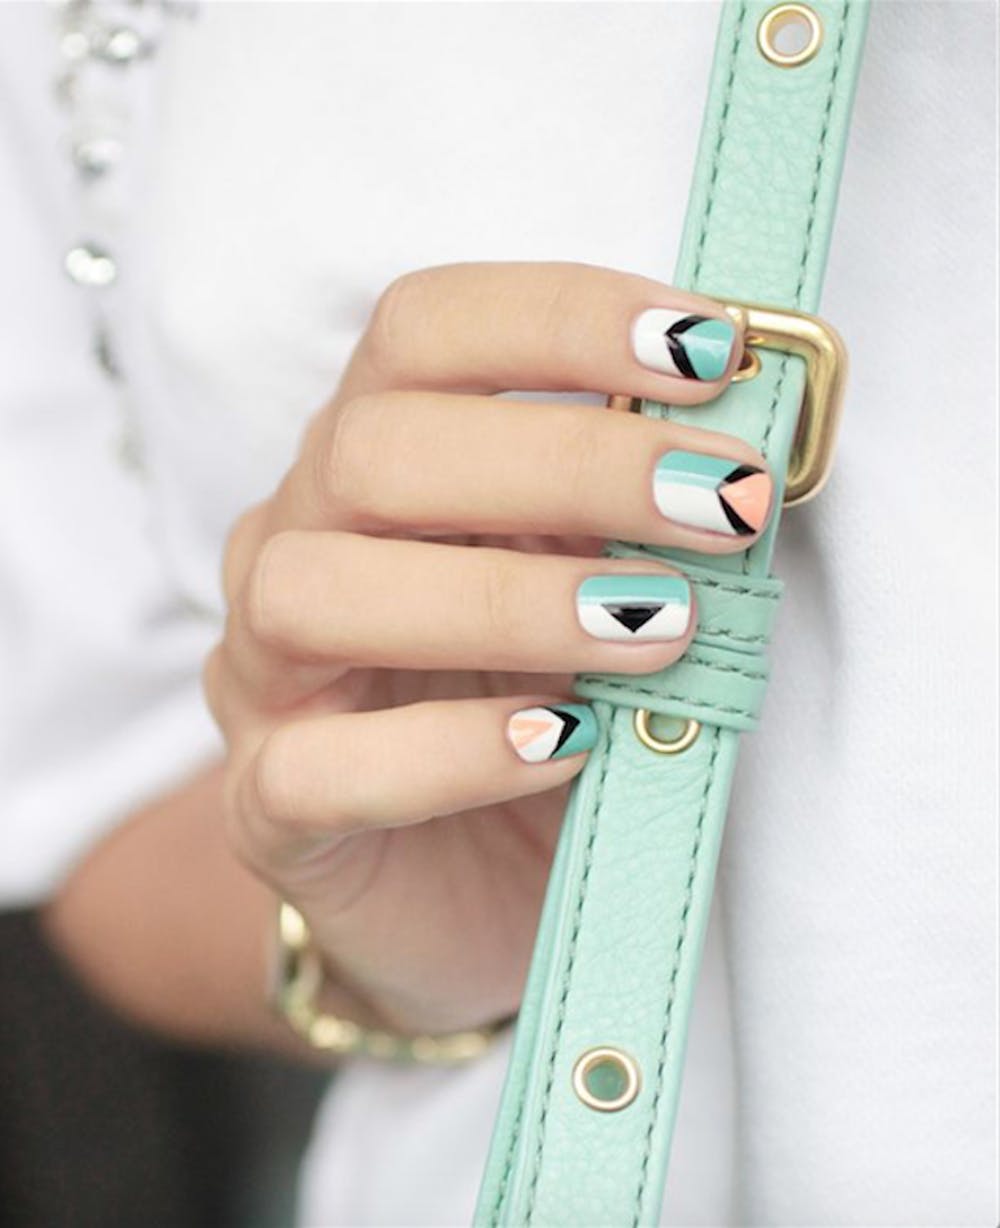 Squoval Nails Along With Geometric Style-vvpretty